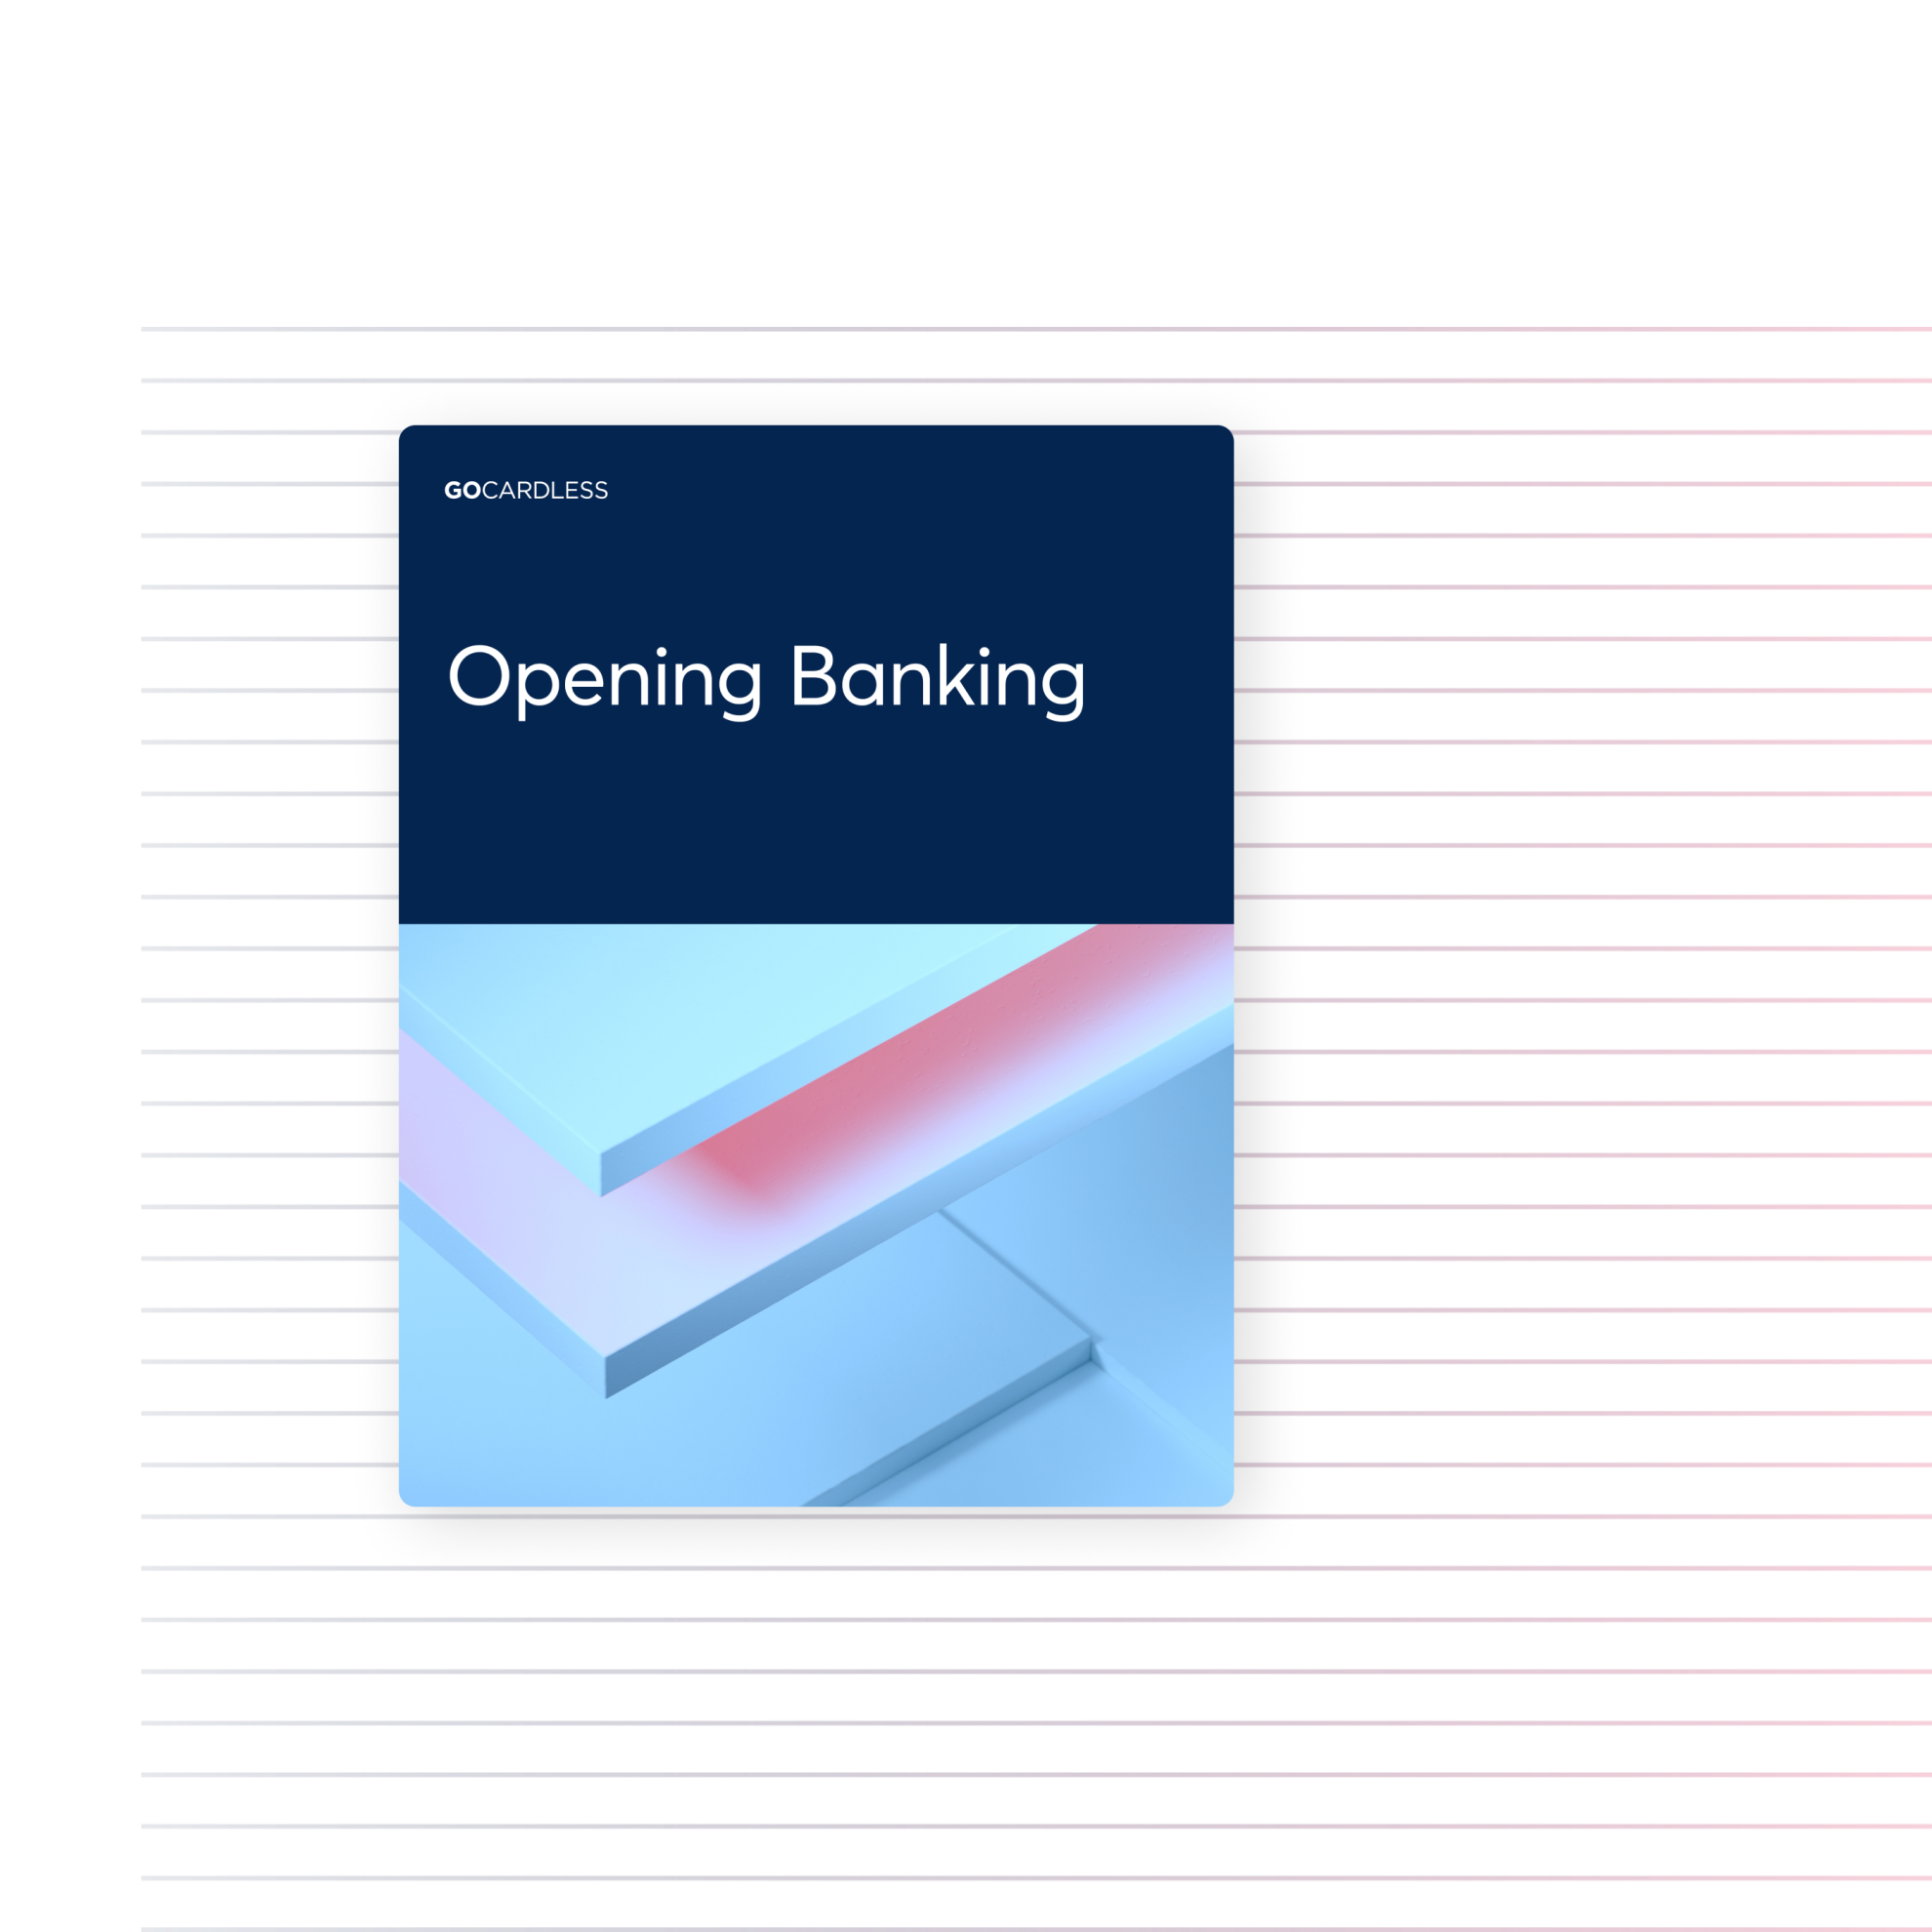 6 reasons why CFOs must harness the power of open banking